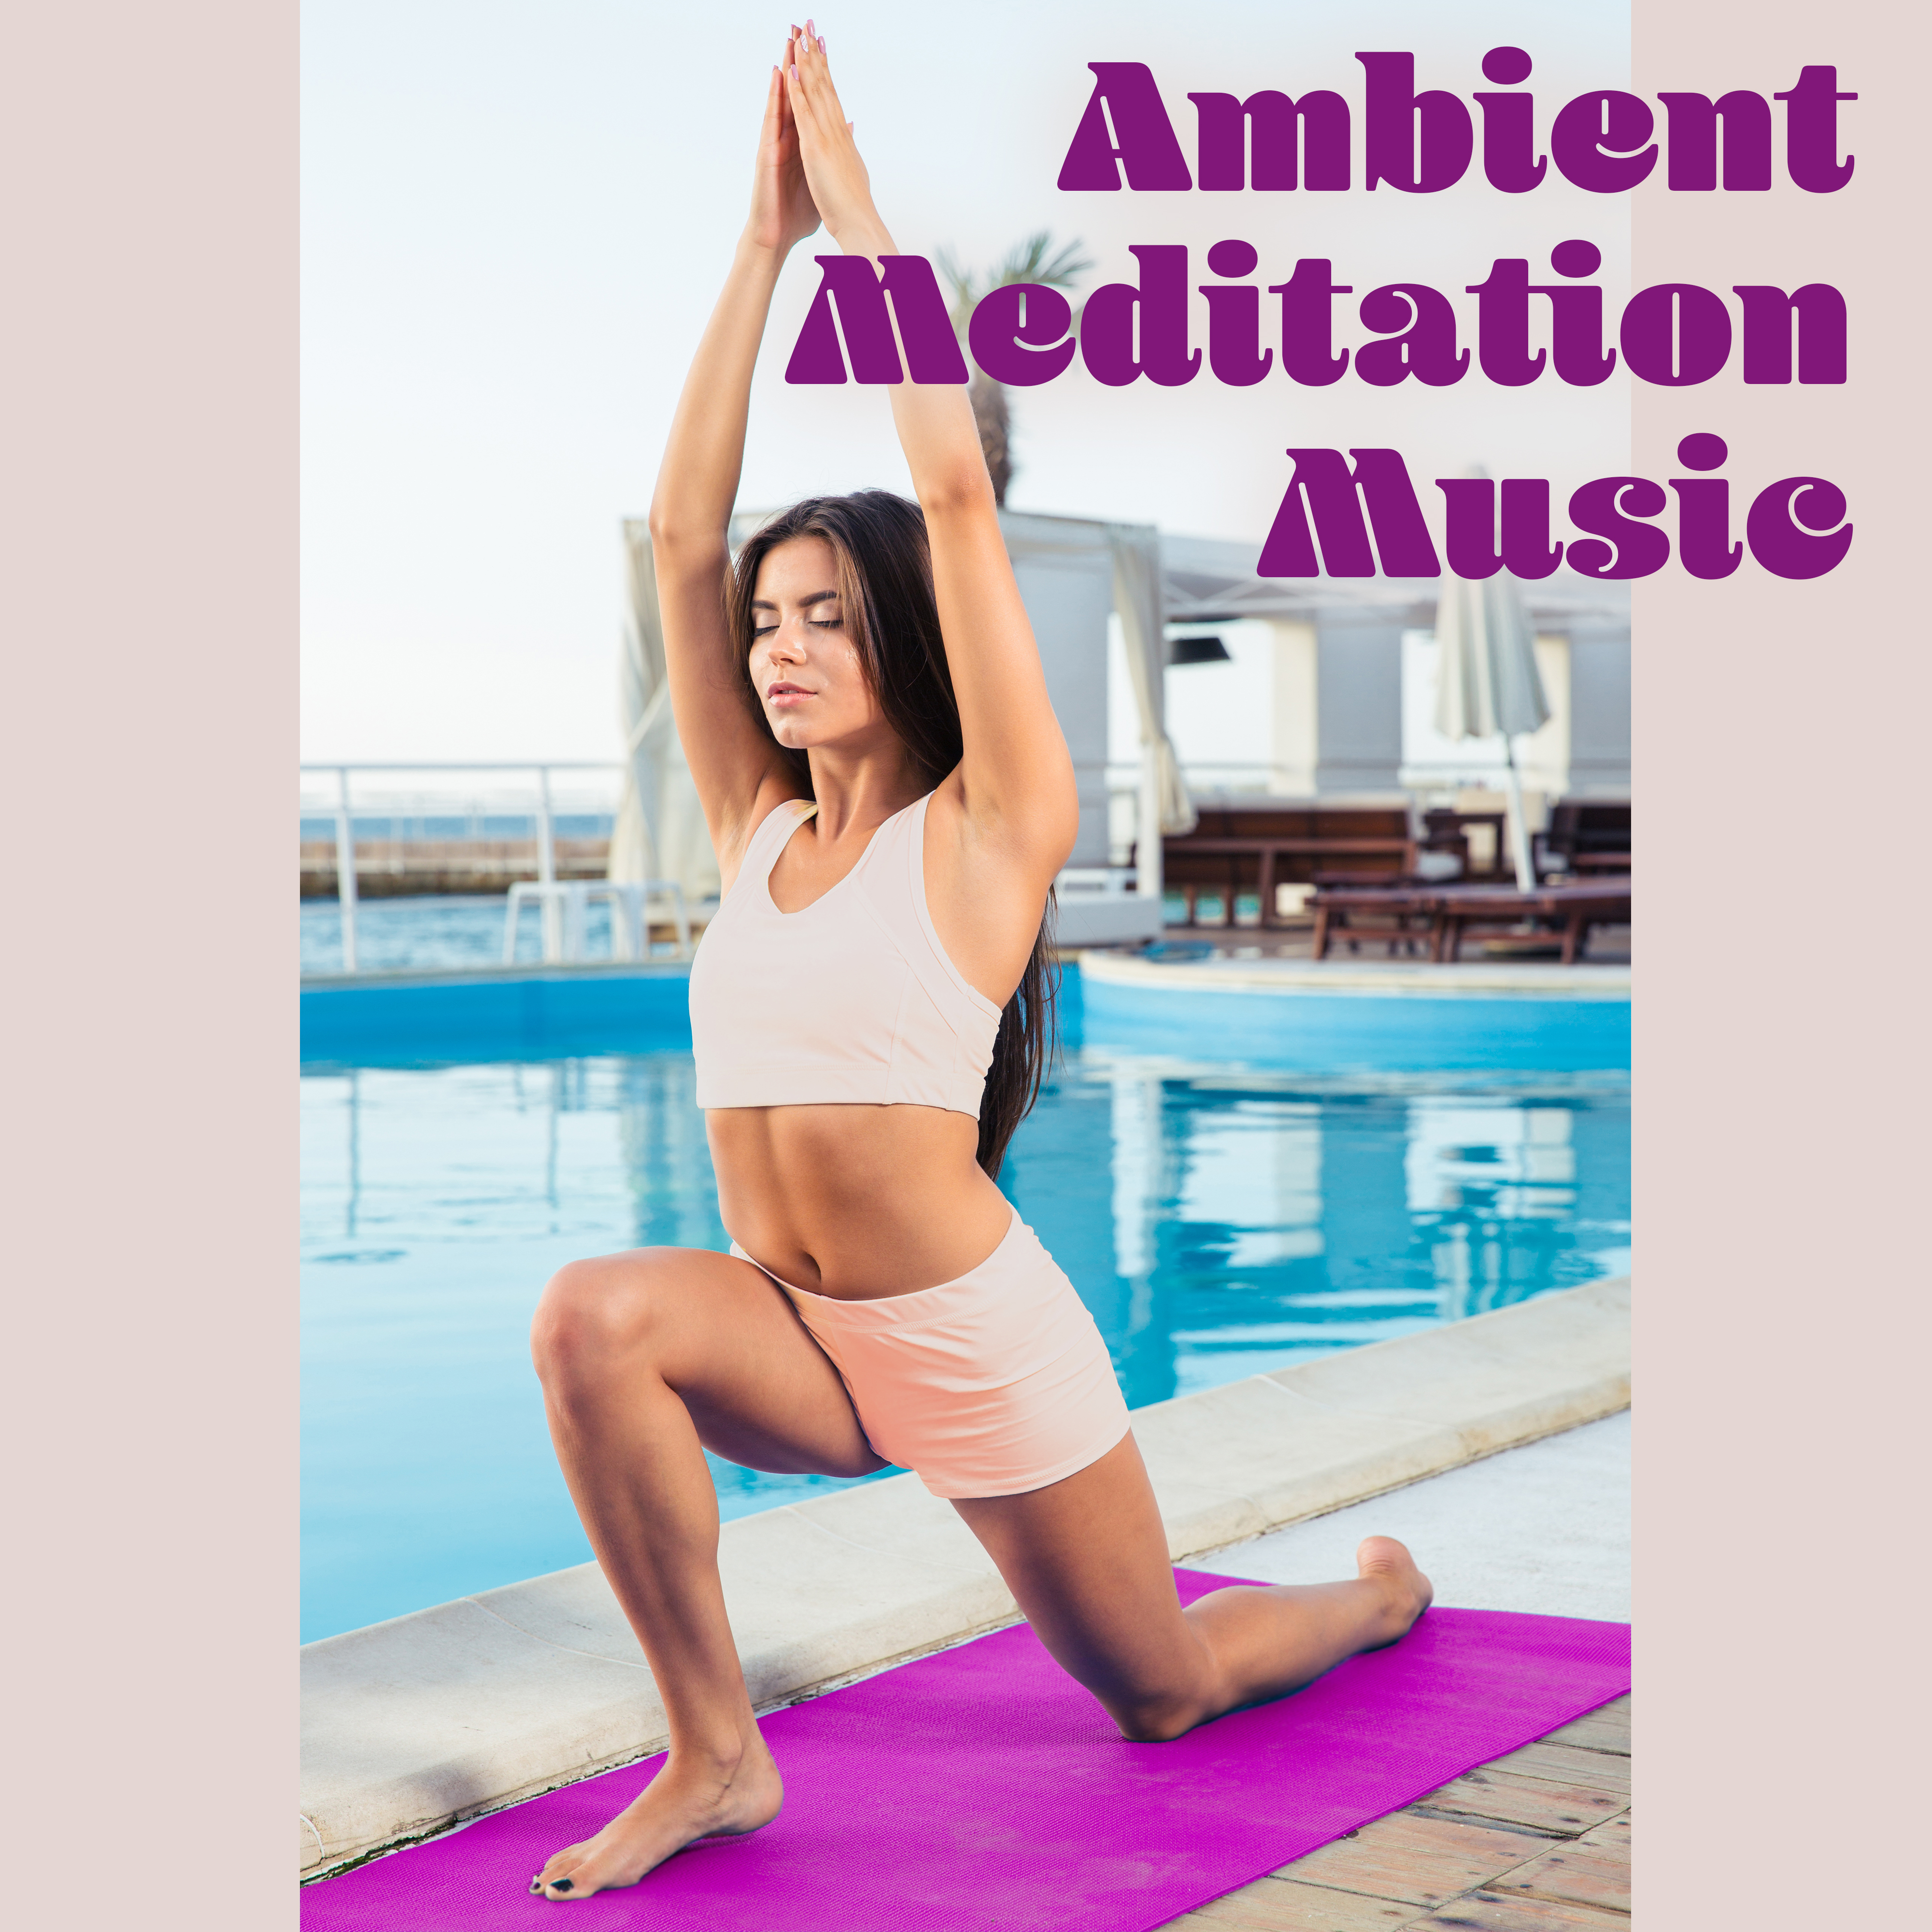 Ambient Meditation Music  Full of Nature Sounds for Calm Down and Relax, Feel Inner Peace, Yoga Music